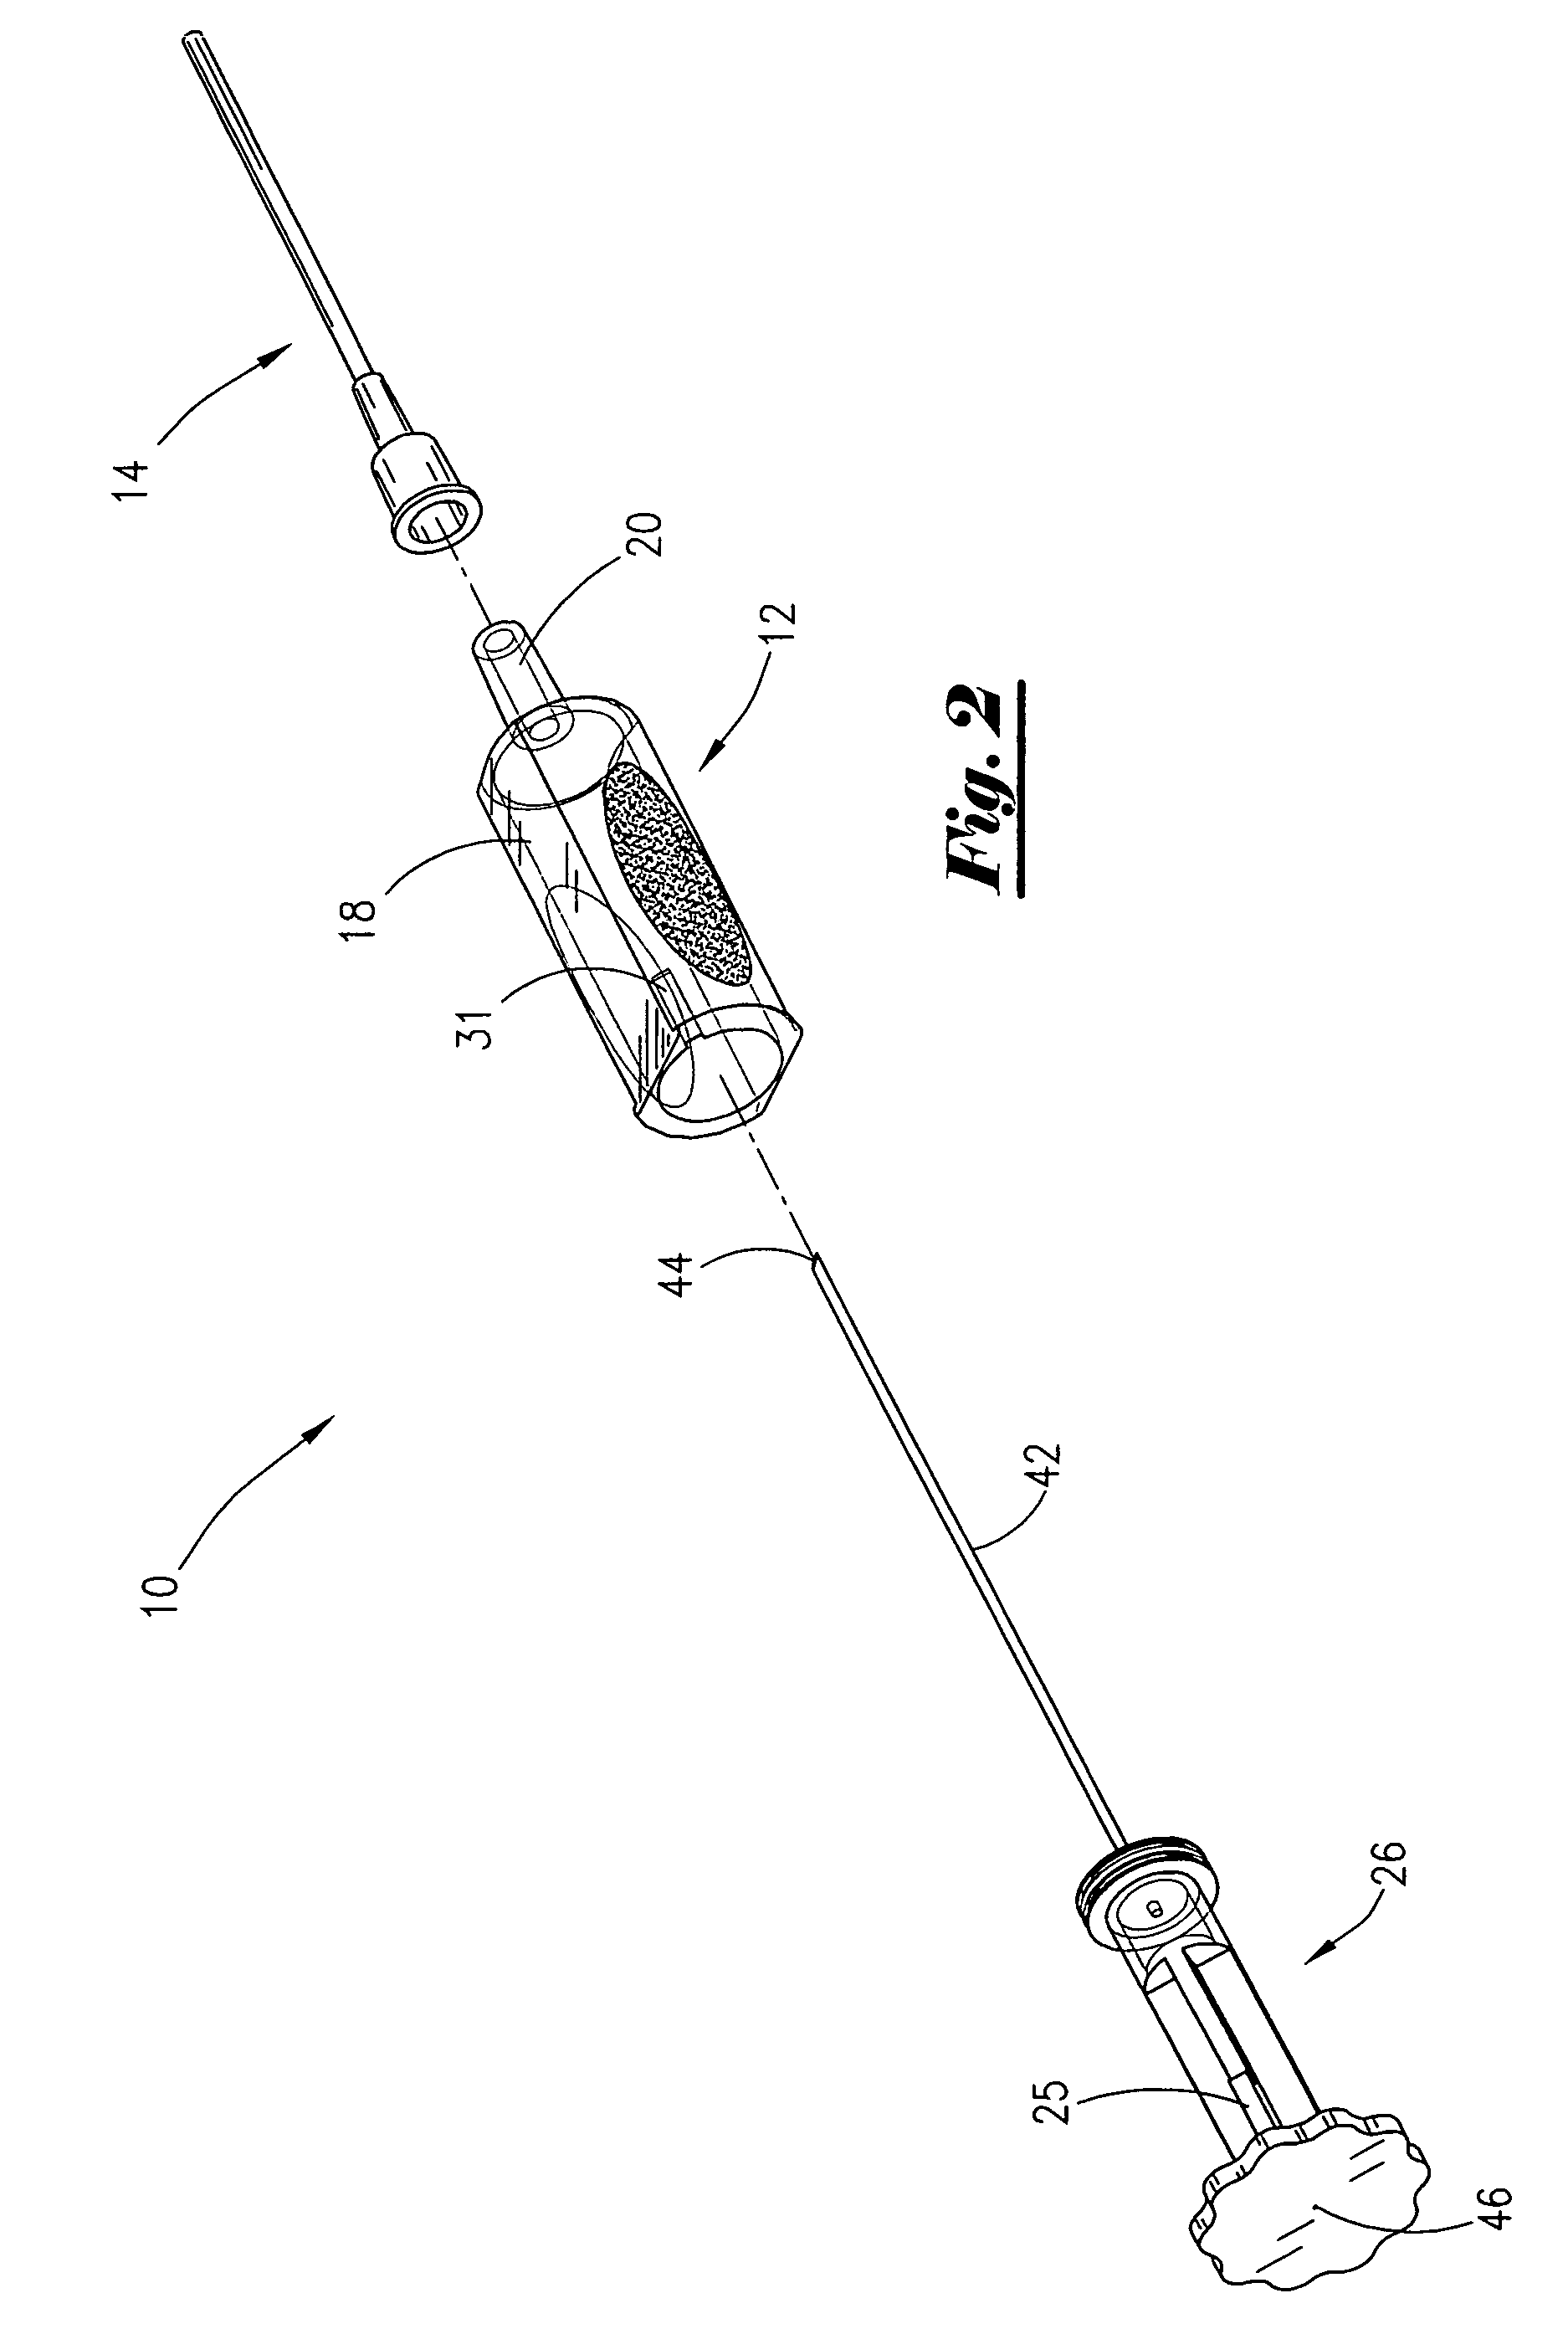 Method and apparatus for introducing an intravenous catheter